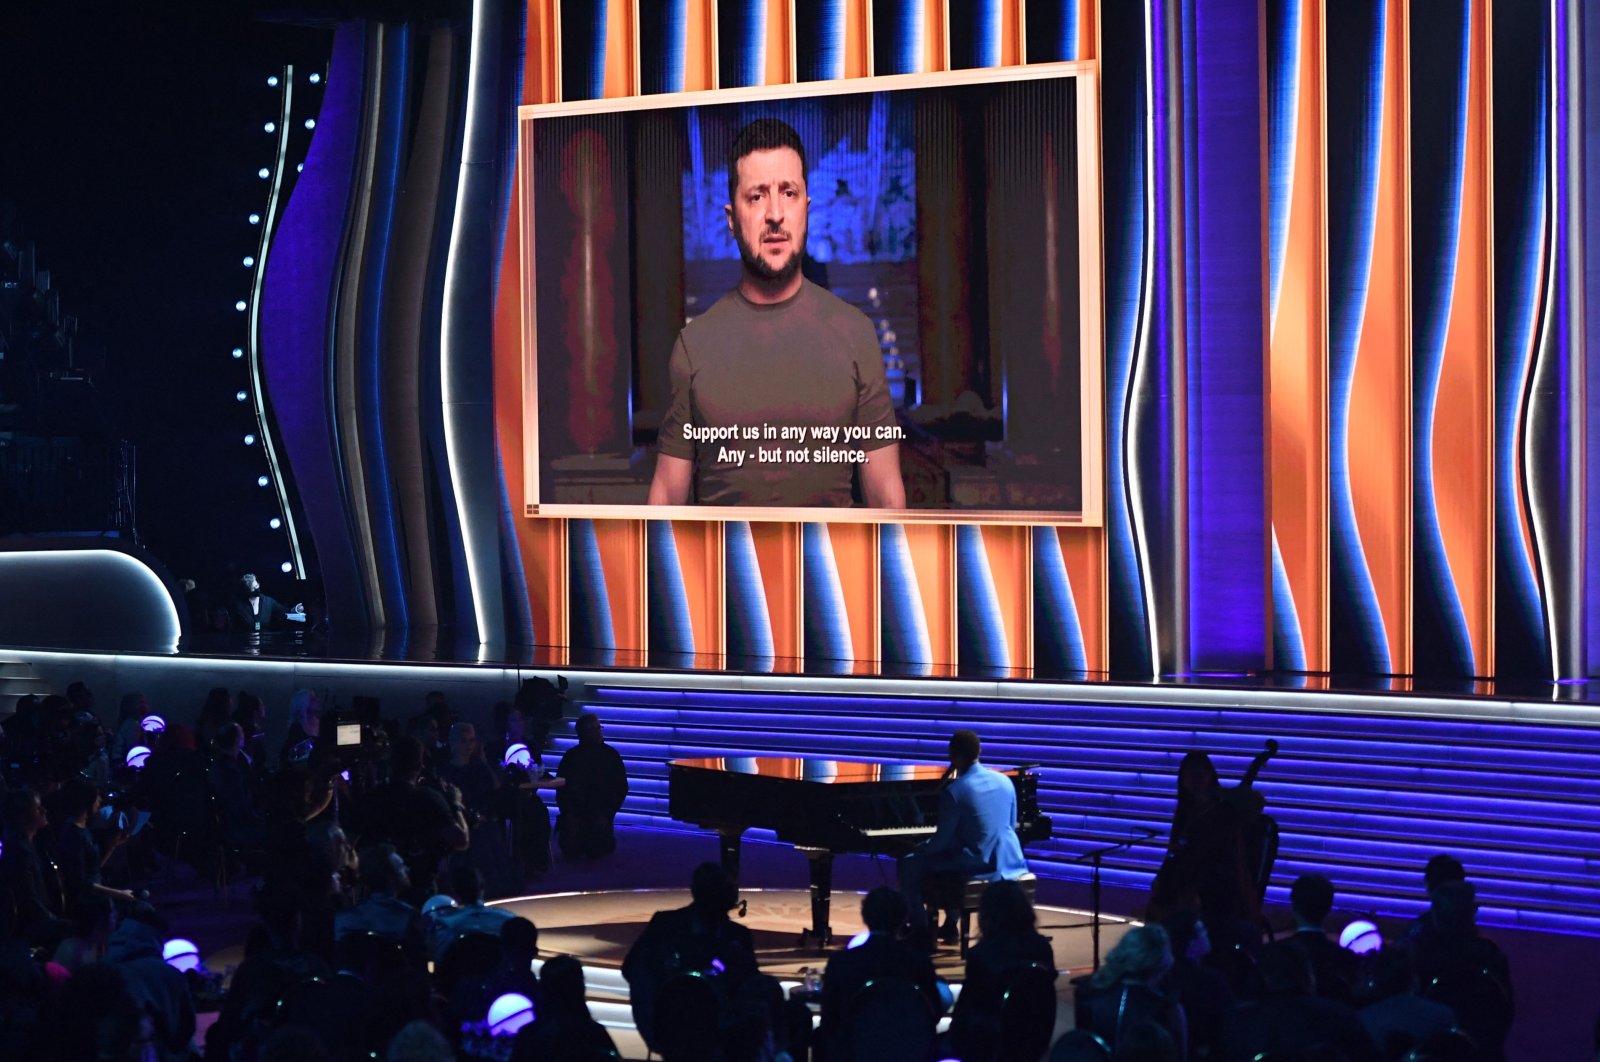 Ukraine&#039;s President Volodymyr Zelenskyy appears on screen during the 64th Annual Grammy Awards at the MGM Grand Garden Arena in Las Vegas, U.S., April 3, 2022. (AFP Photo)